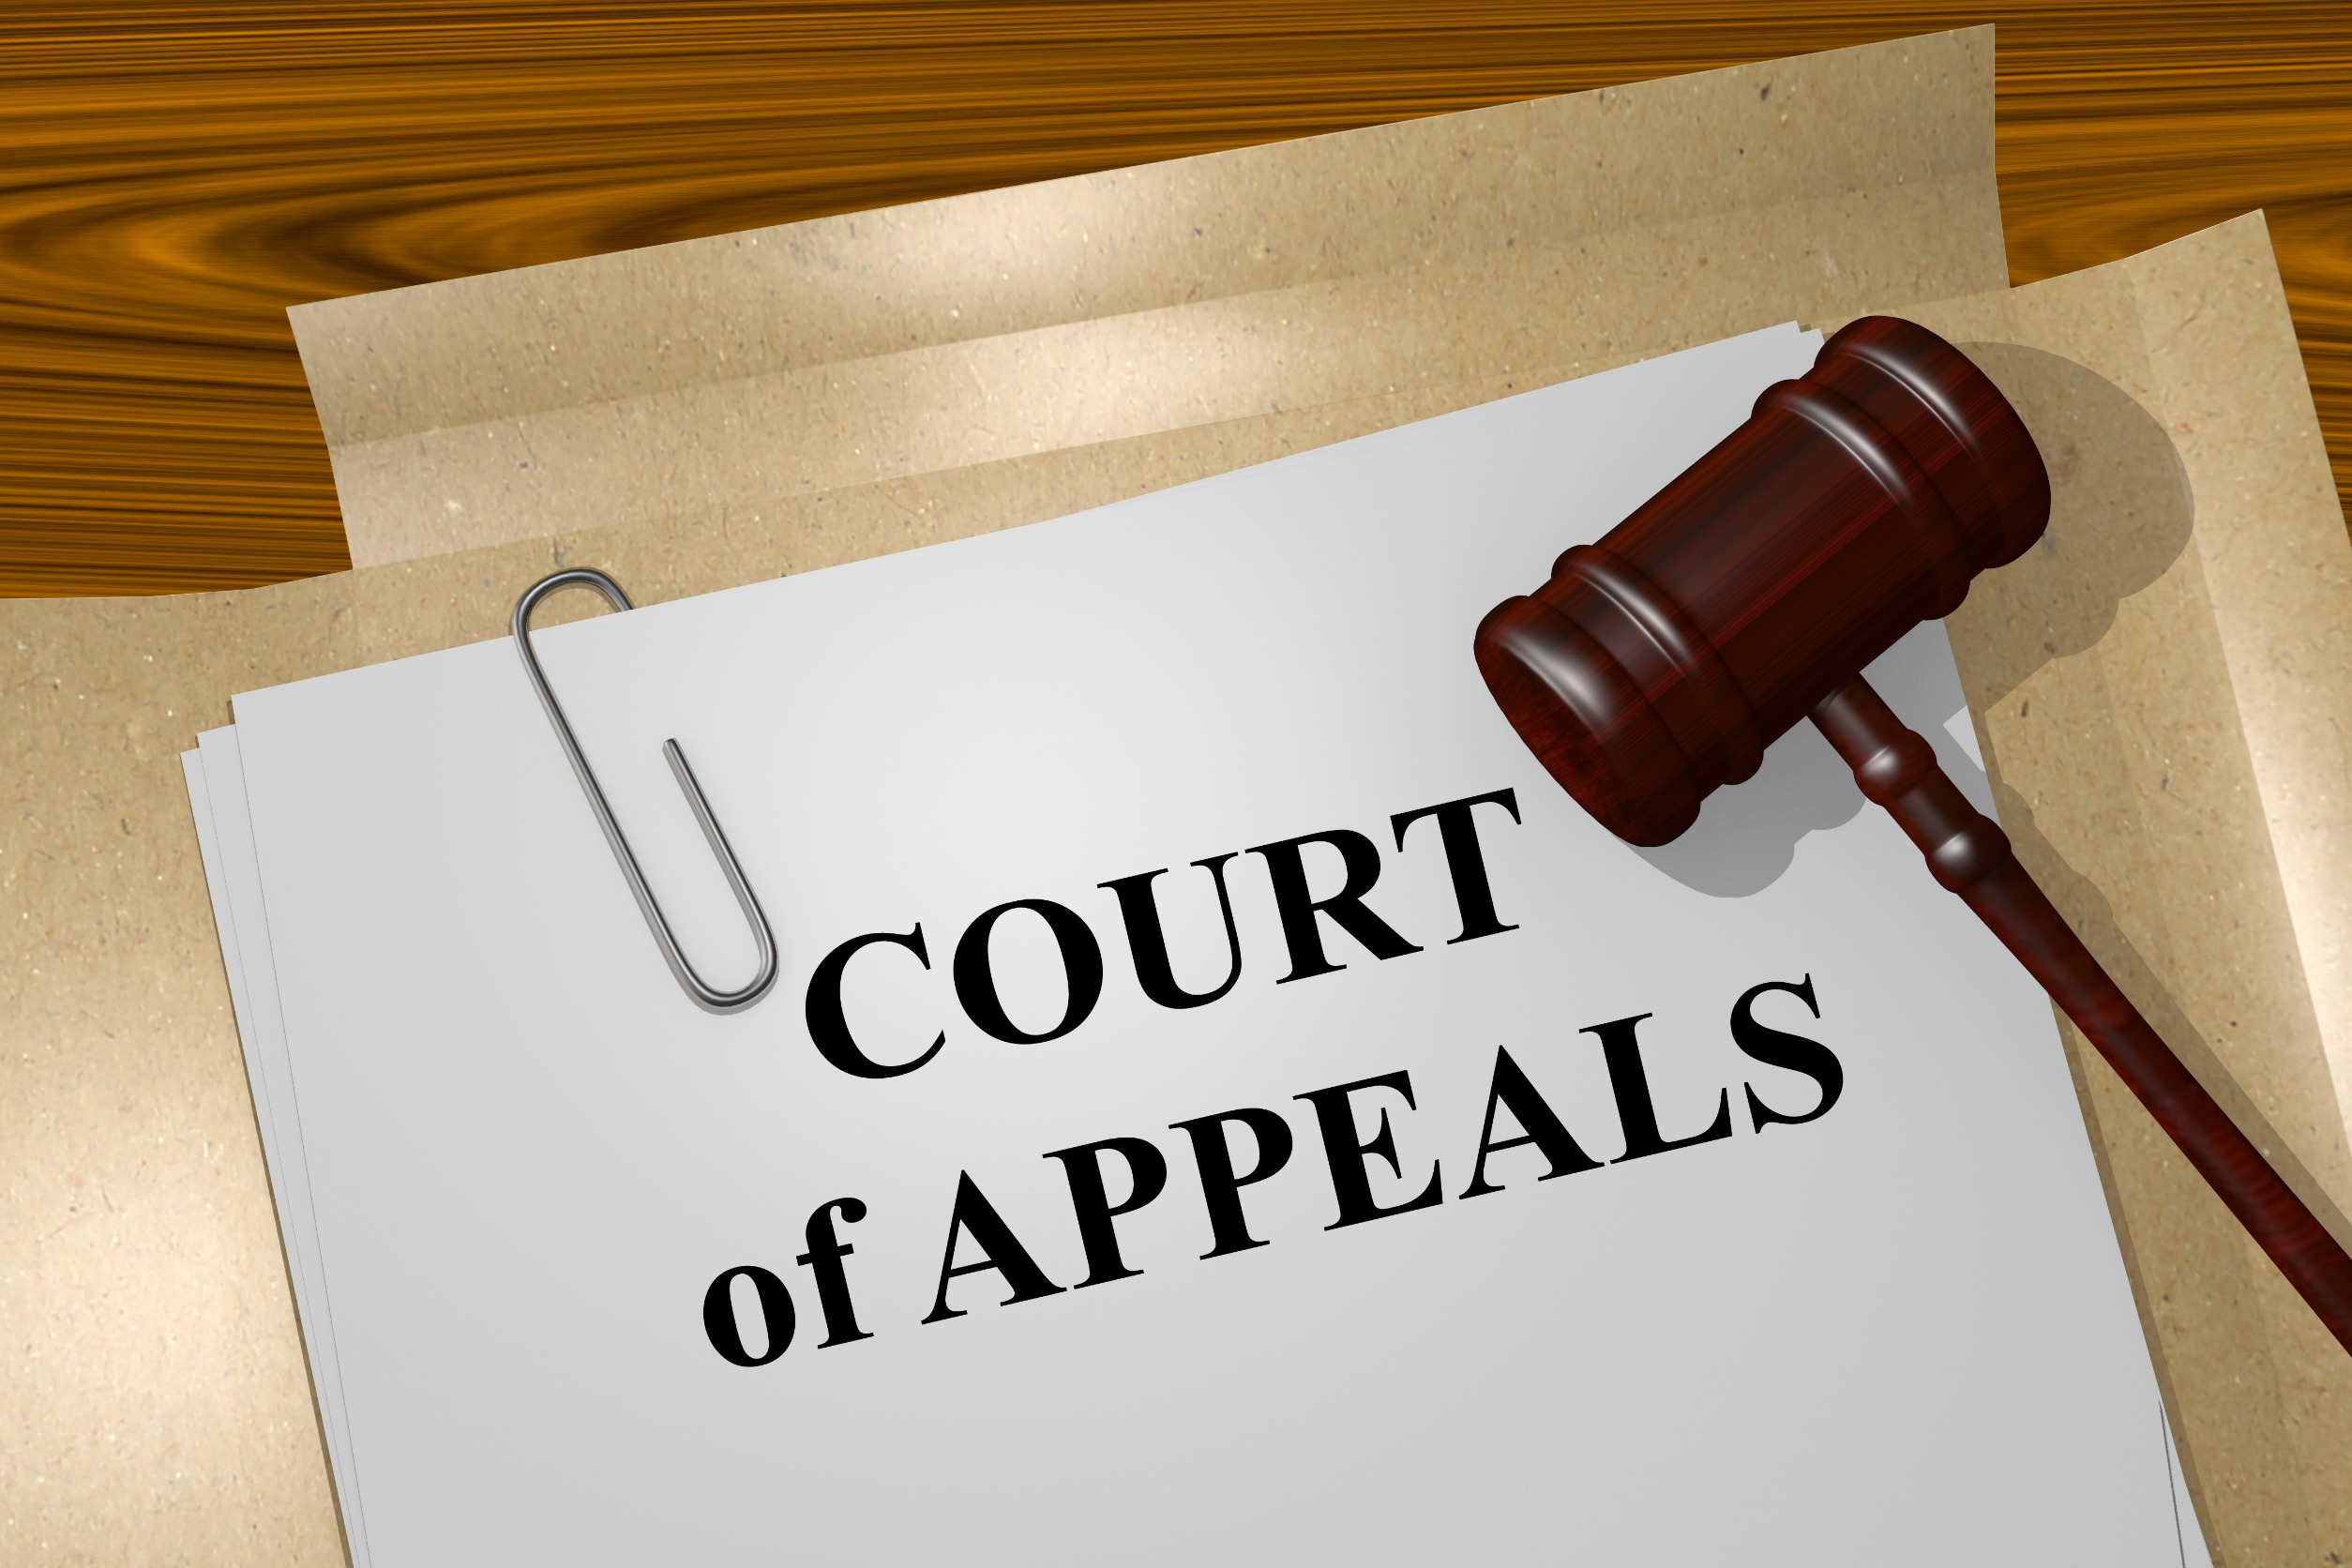 appealing a Missouri circuit court judgment